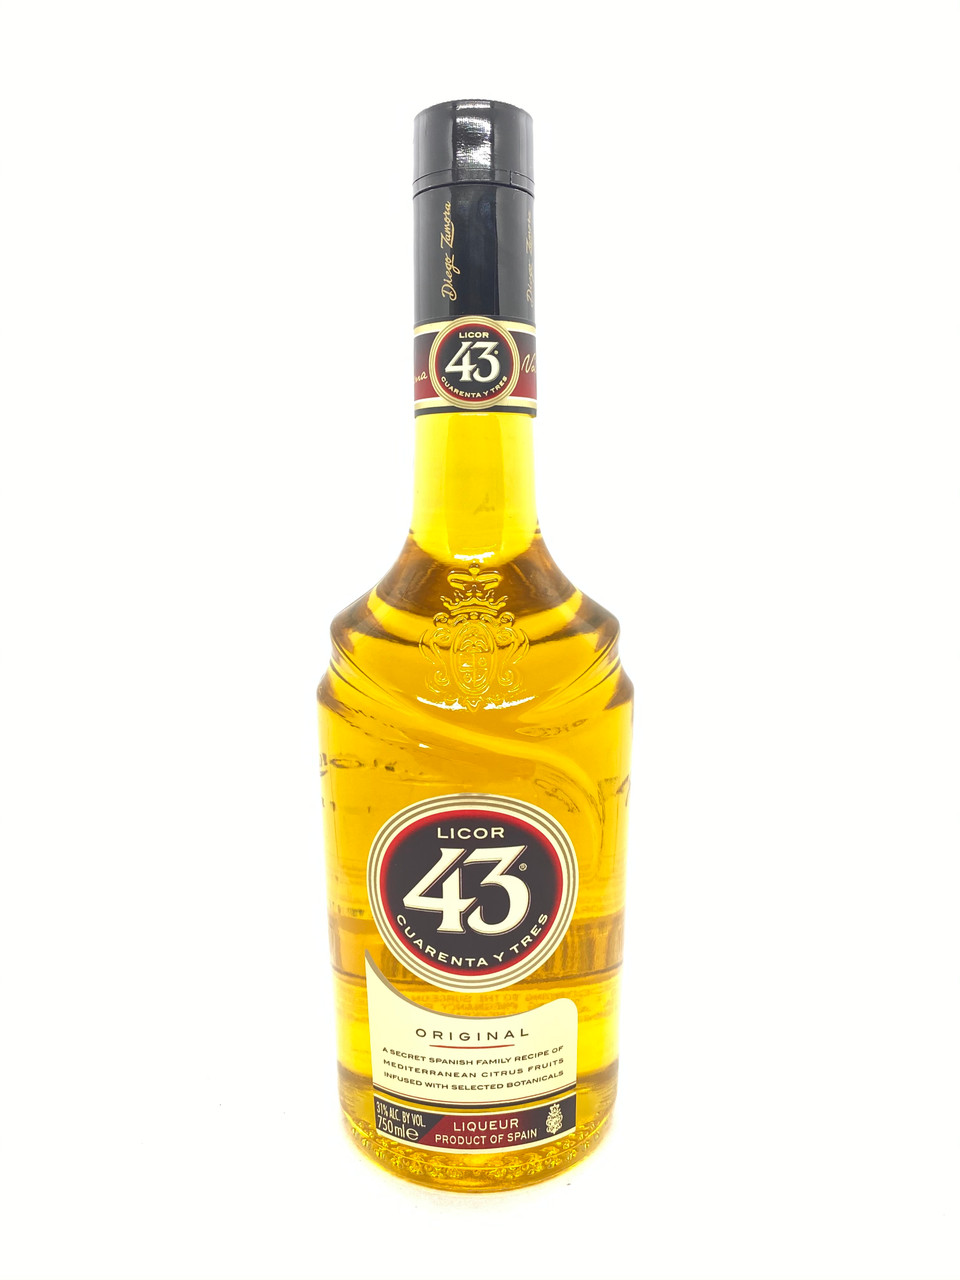 Licor 43 (Cuarenta Y Tres): The Jewel of Southern Spain…